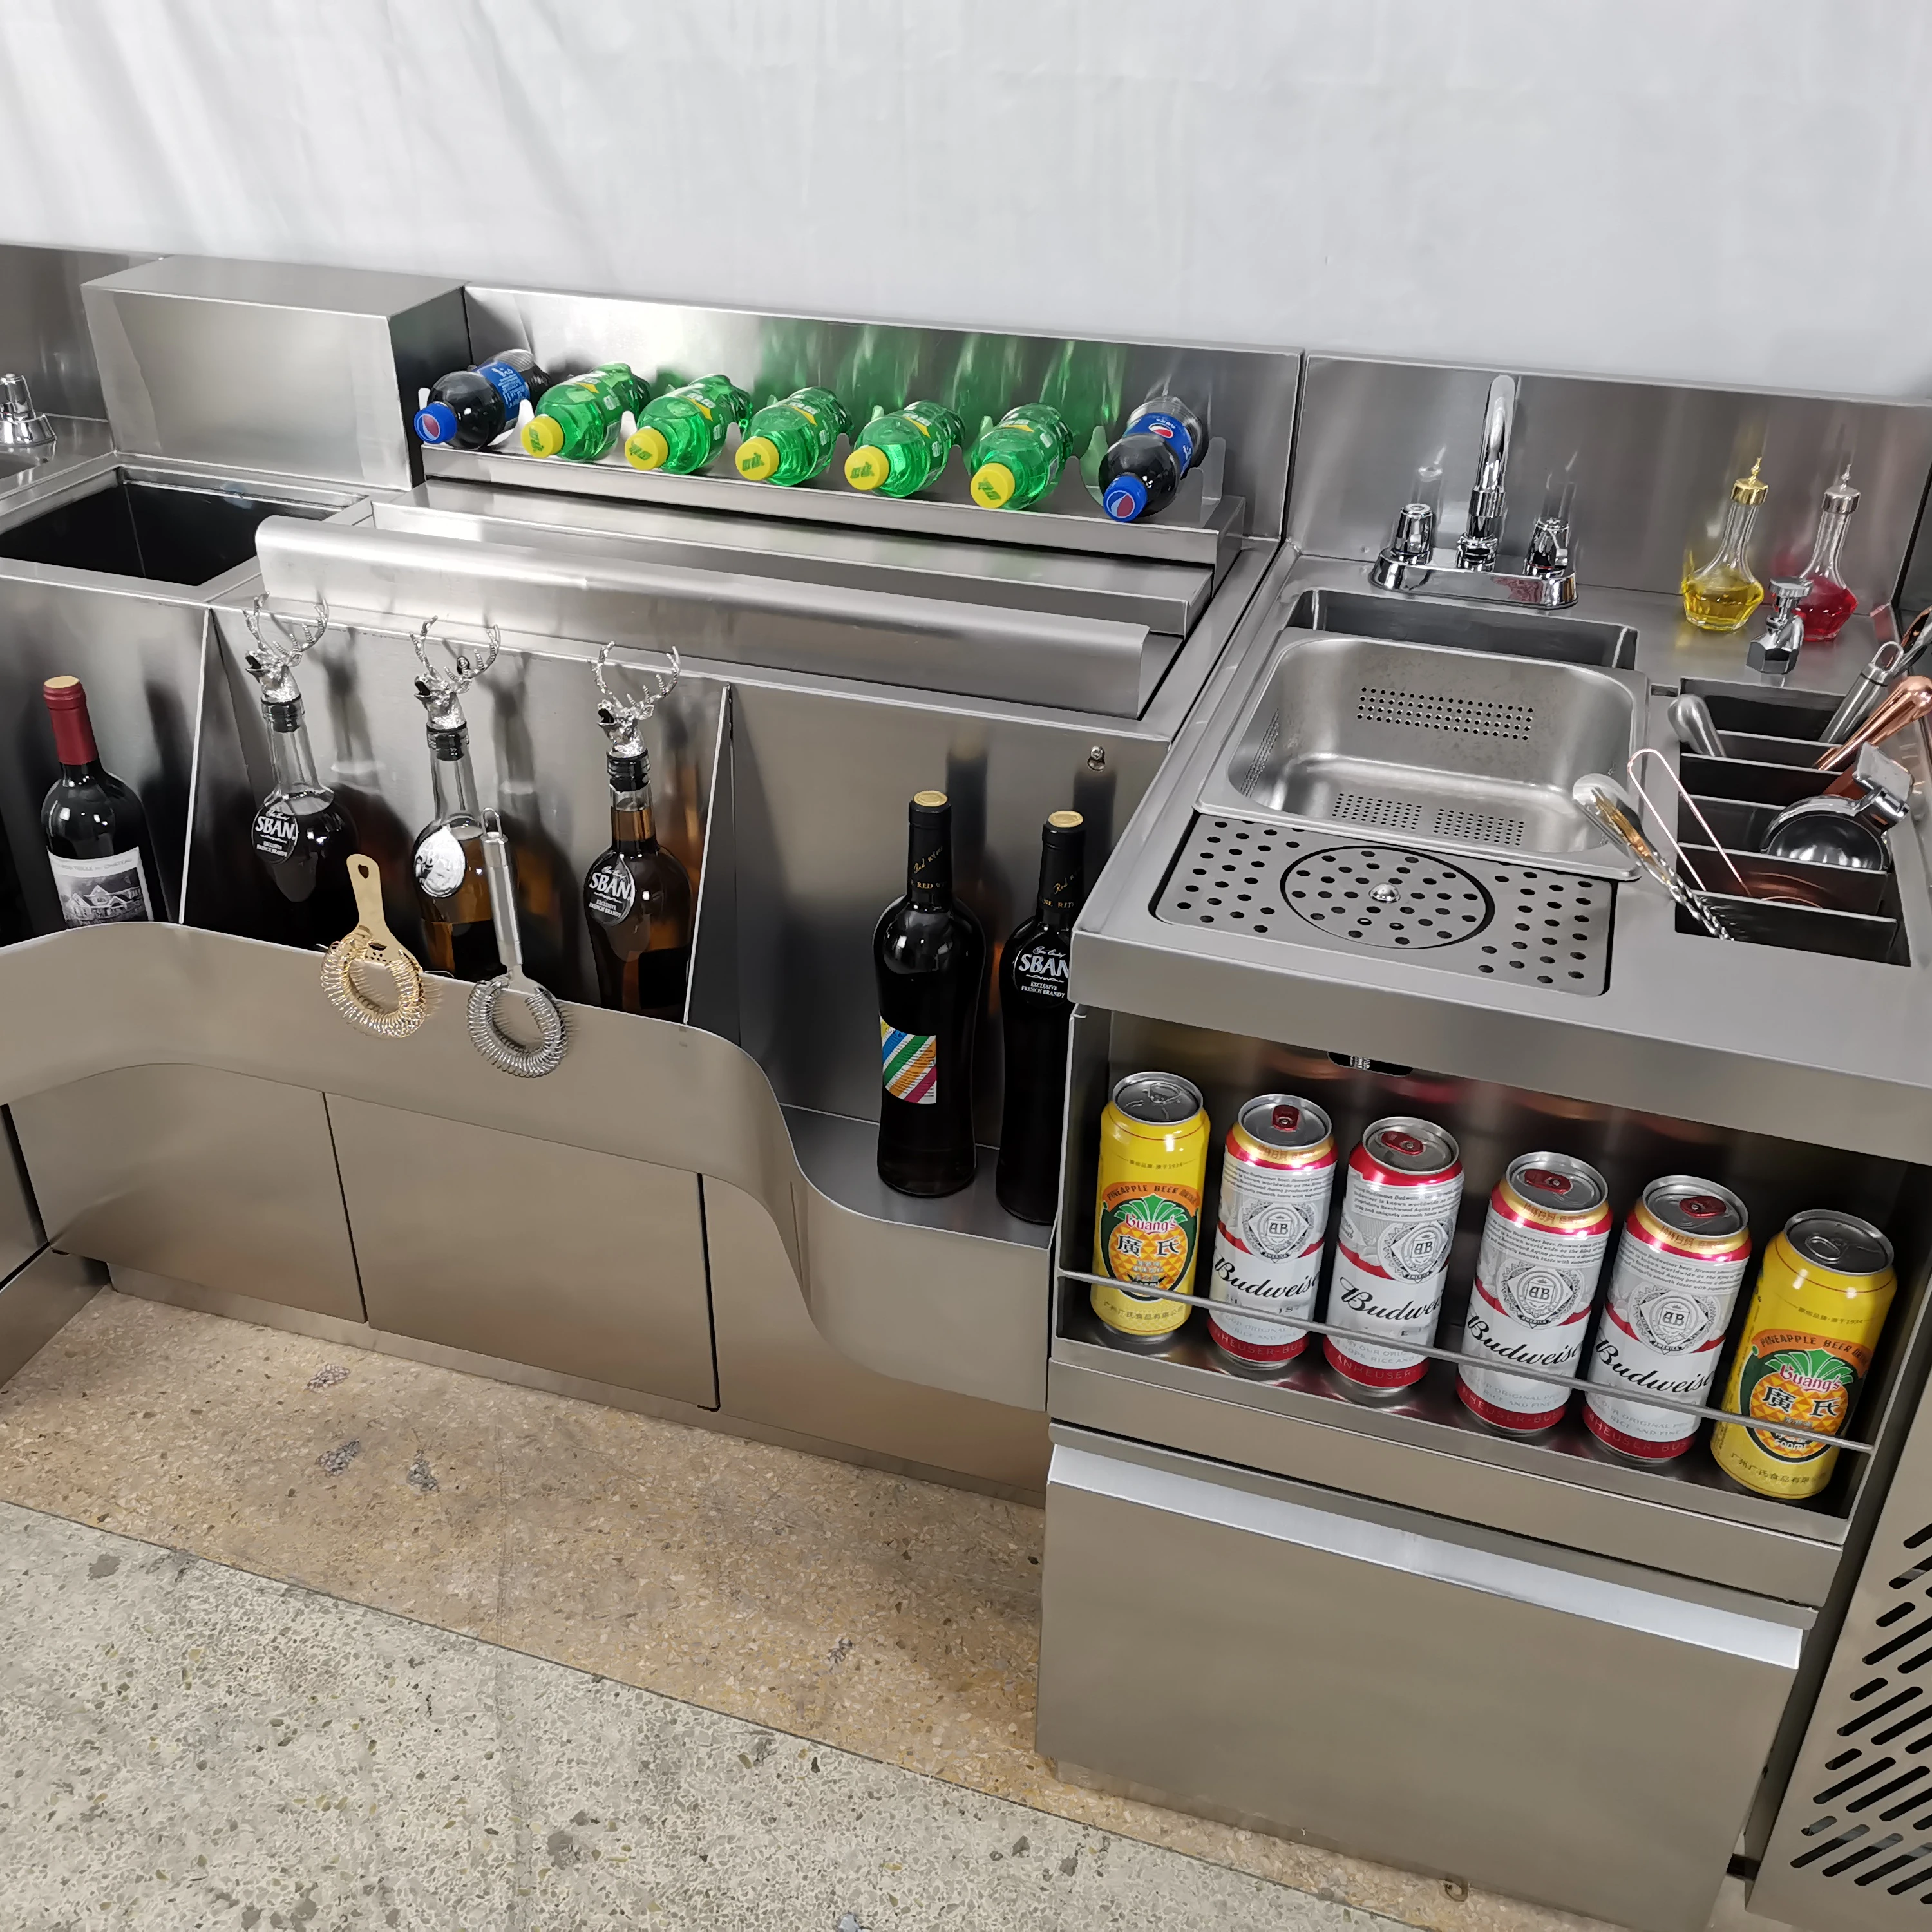 How To Specify a Cocktail Station - Foodservice Equipment Reports